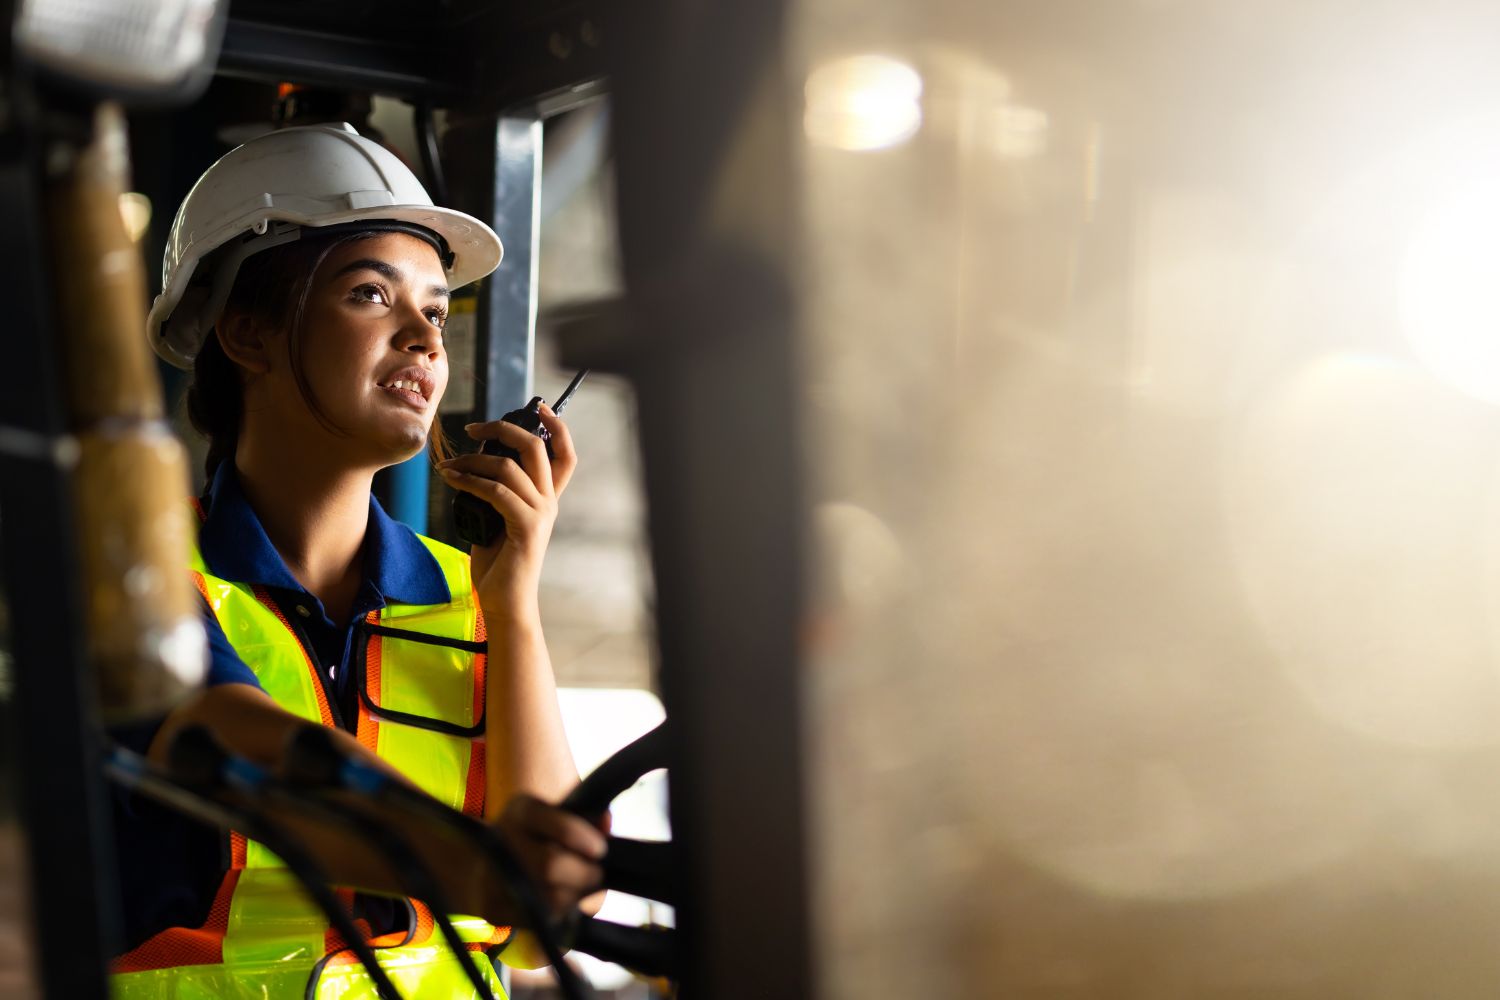 A woman driving a small equipment vehicle talking on a radio